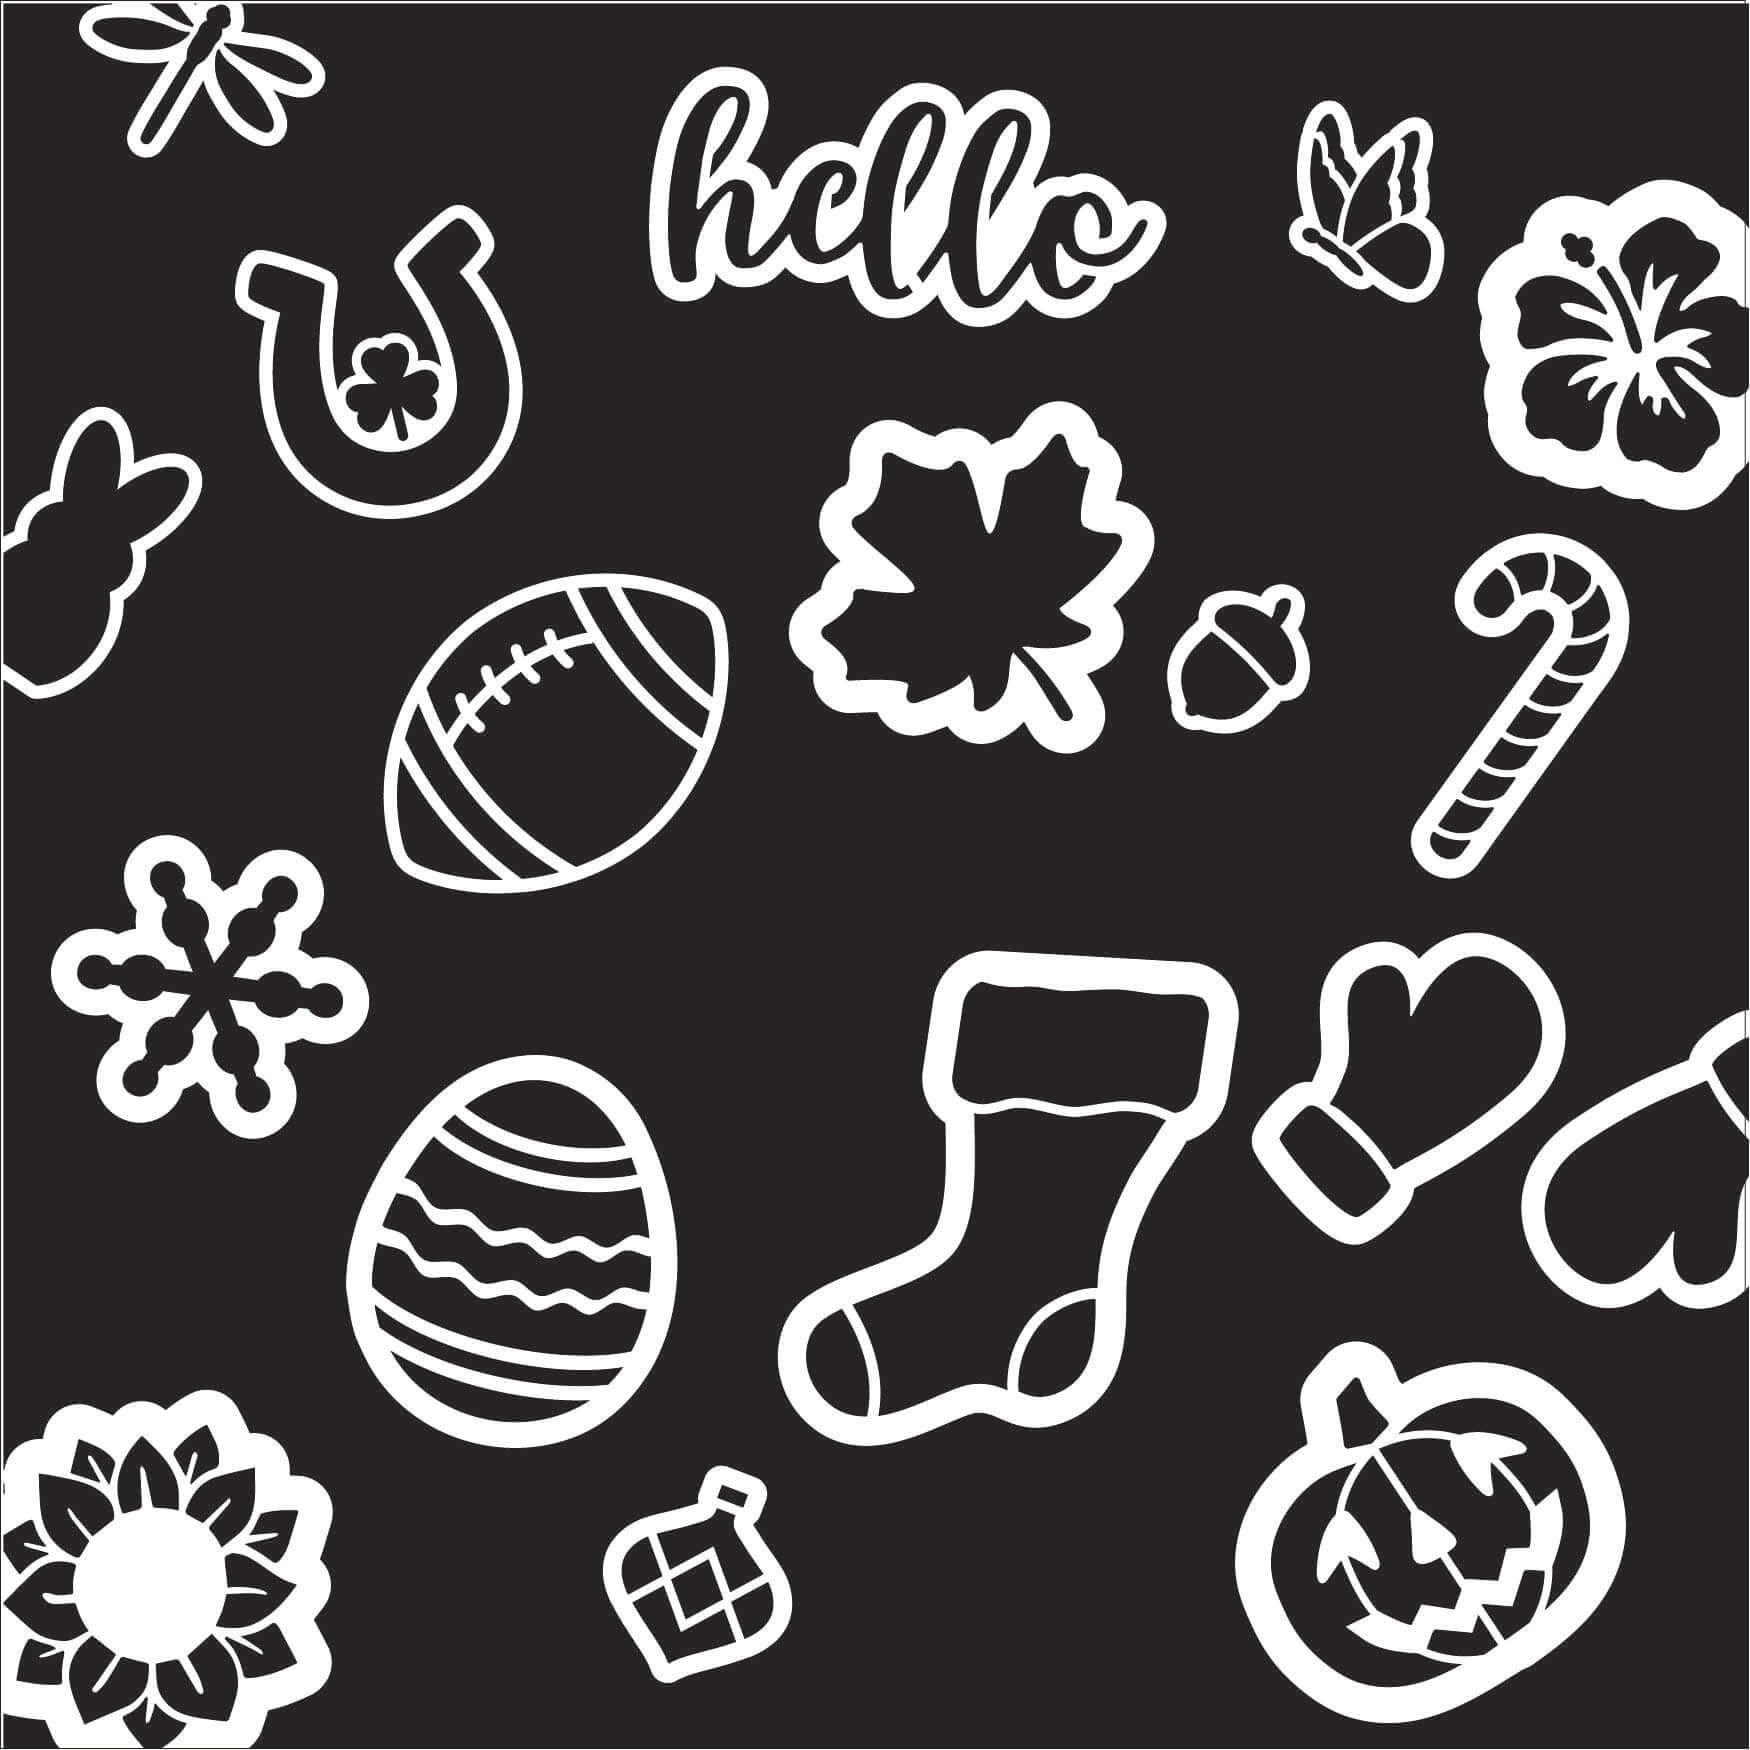 Plata Chalkboards collection of magnetic chalkboard stencil sets for holidays, seasons, sports and more to create chalkboard art for home, business and offices.